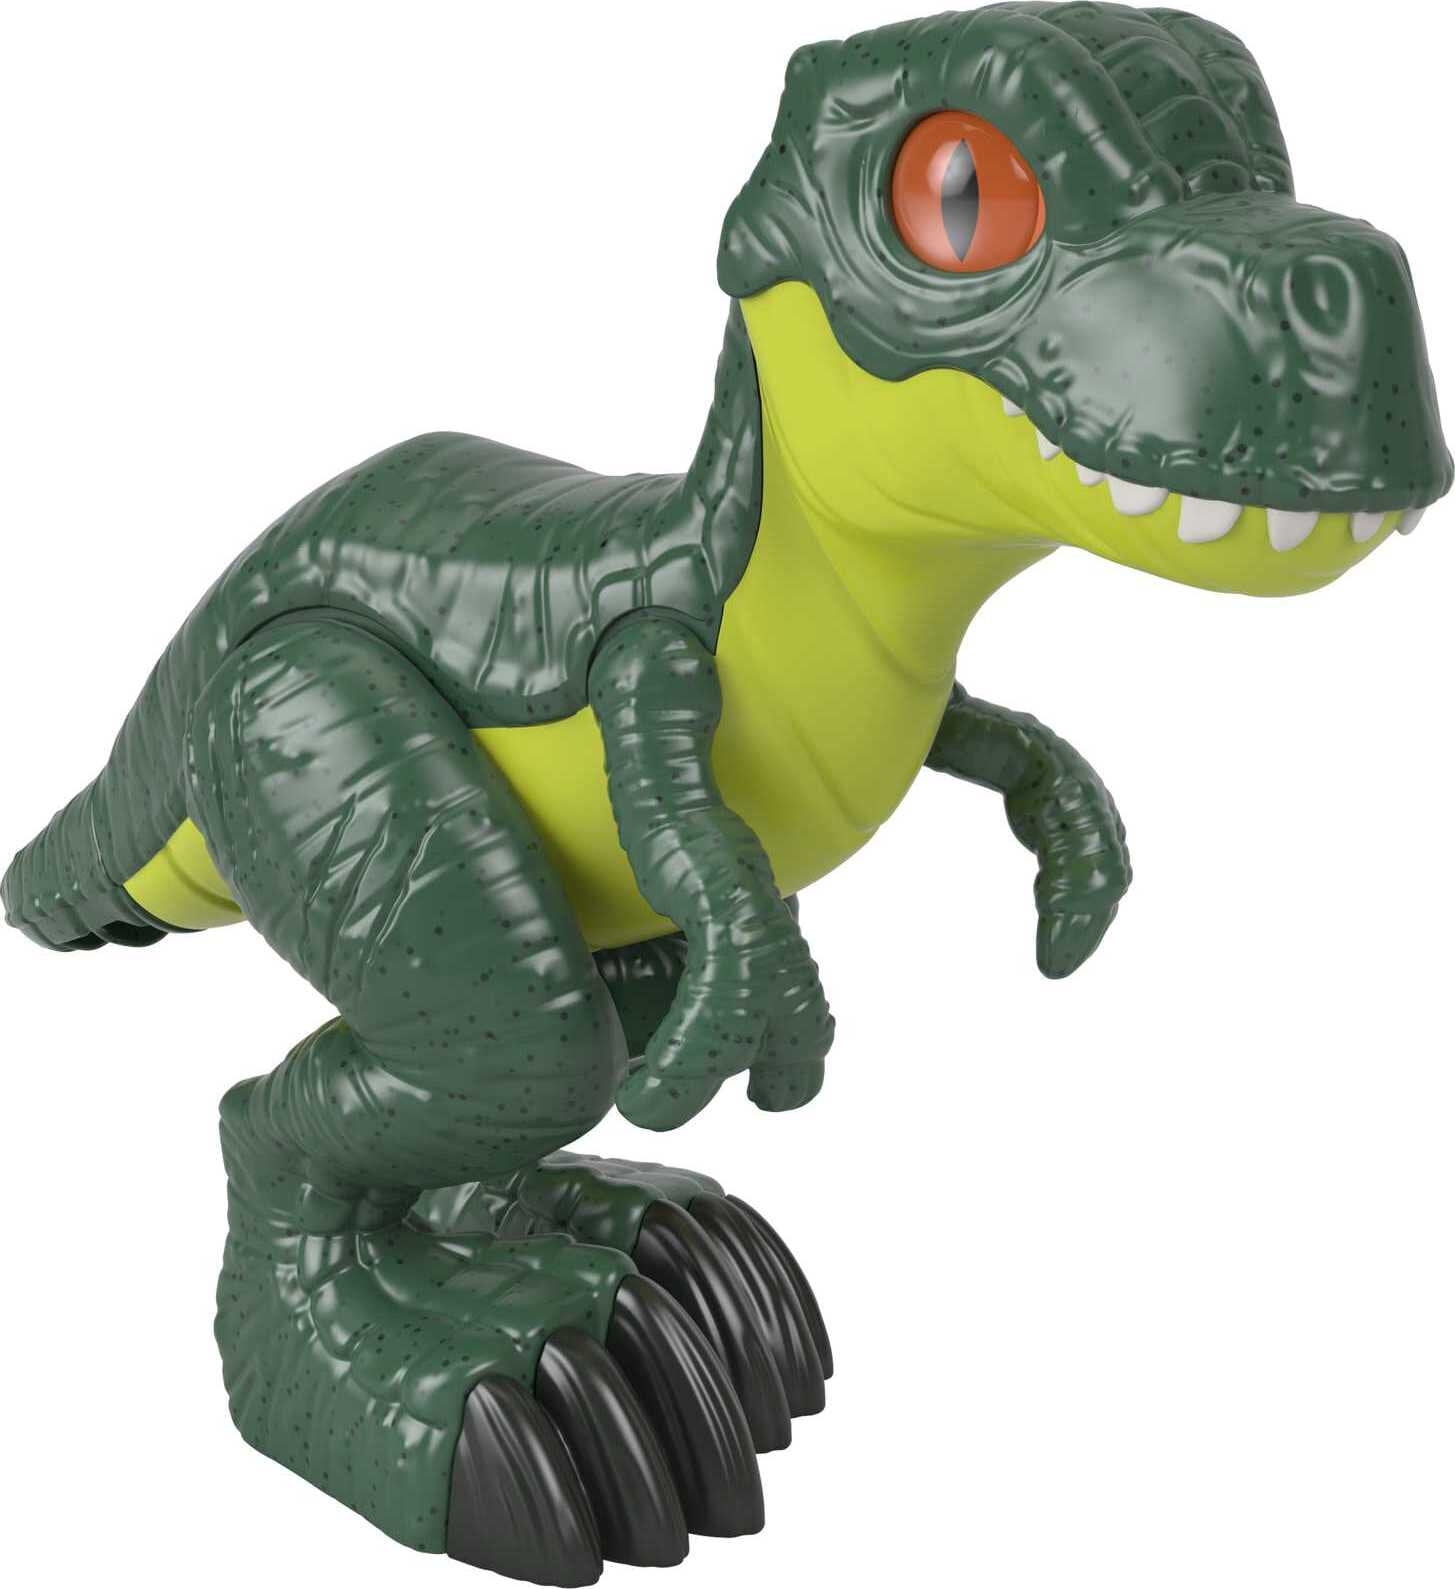 9.5-inch Dinosaur Figure for Preschool Kids Ages 3 to 8 Years Fisher-Price Imaginext Jurassic World T Rex XL 